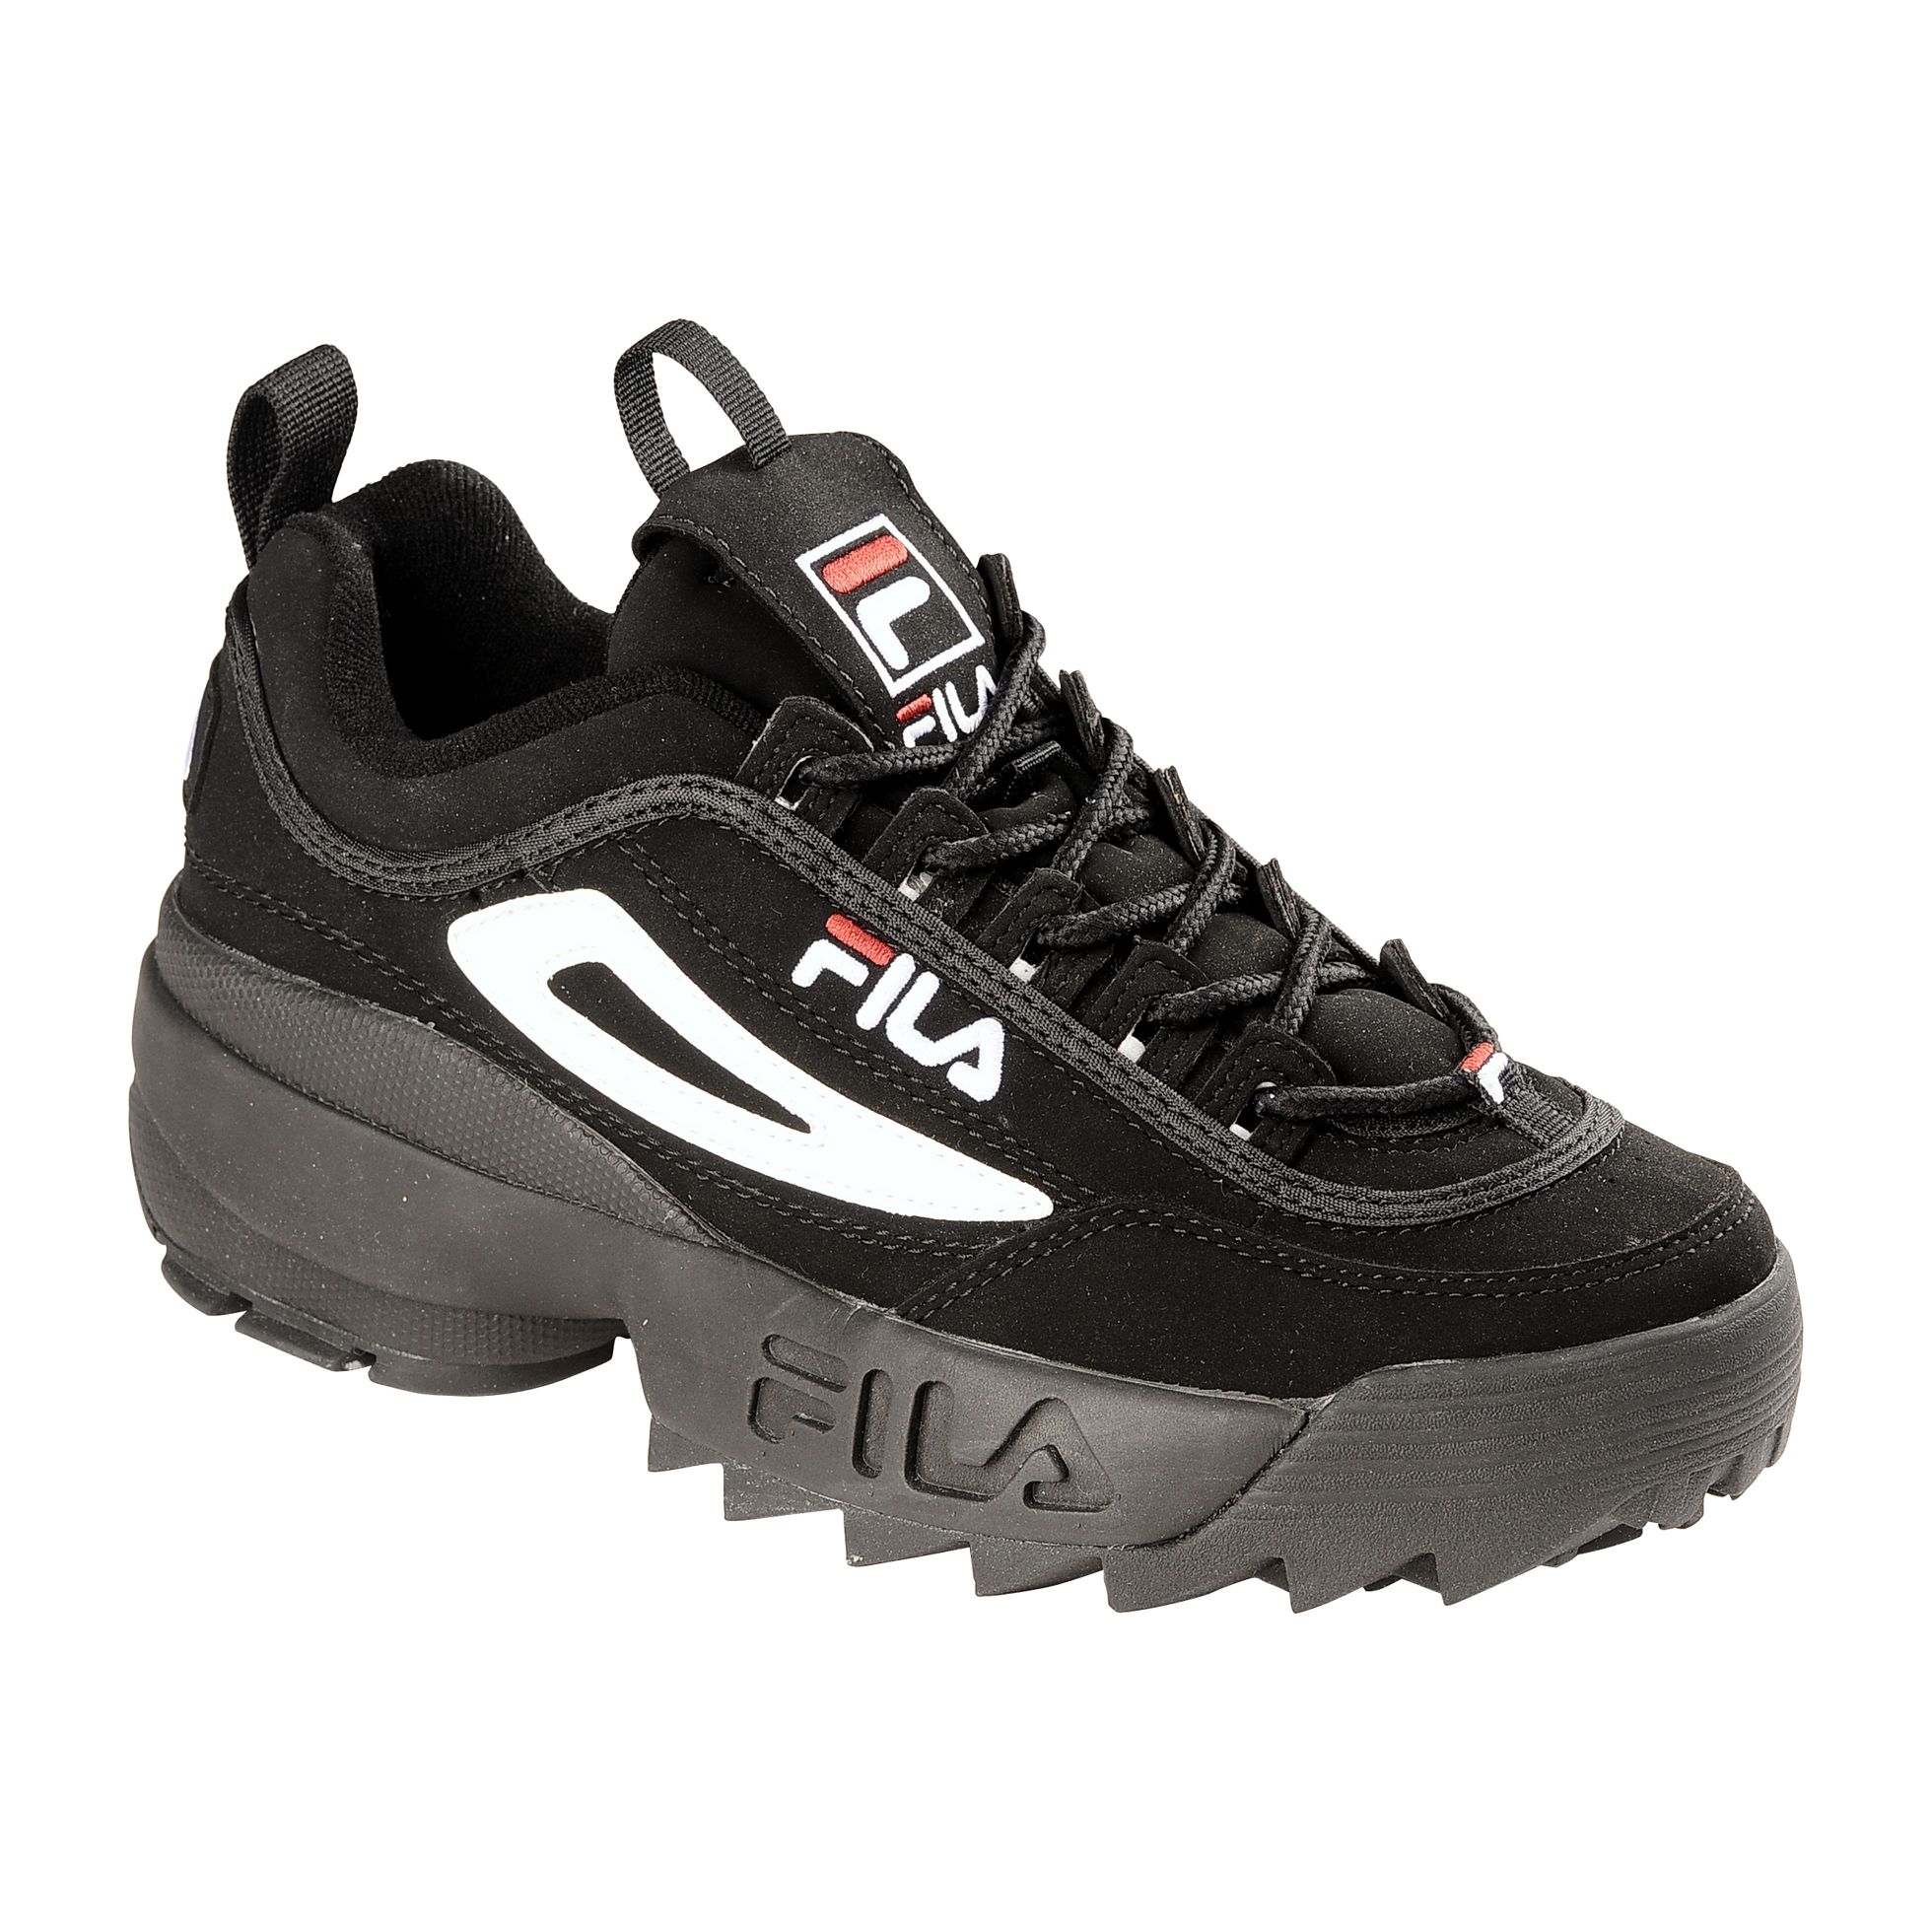 Men's Disruptor Casual Athletic Shoe - Black/White/Red